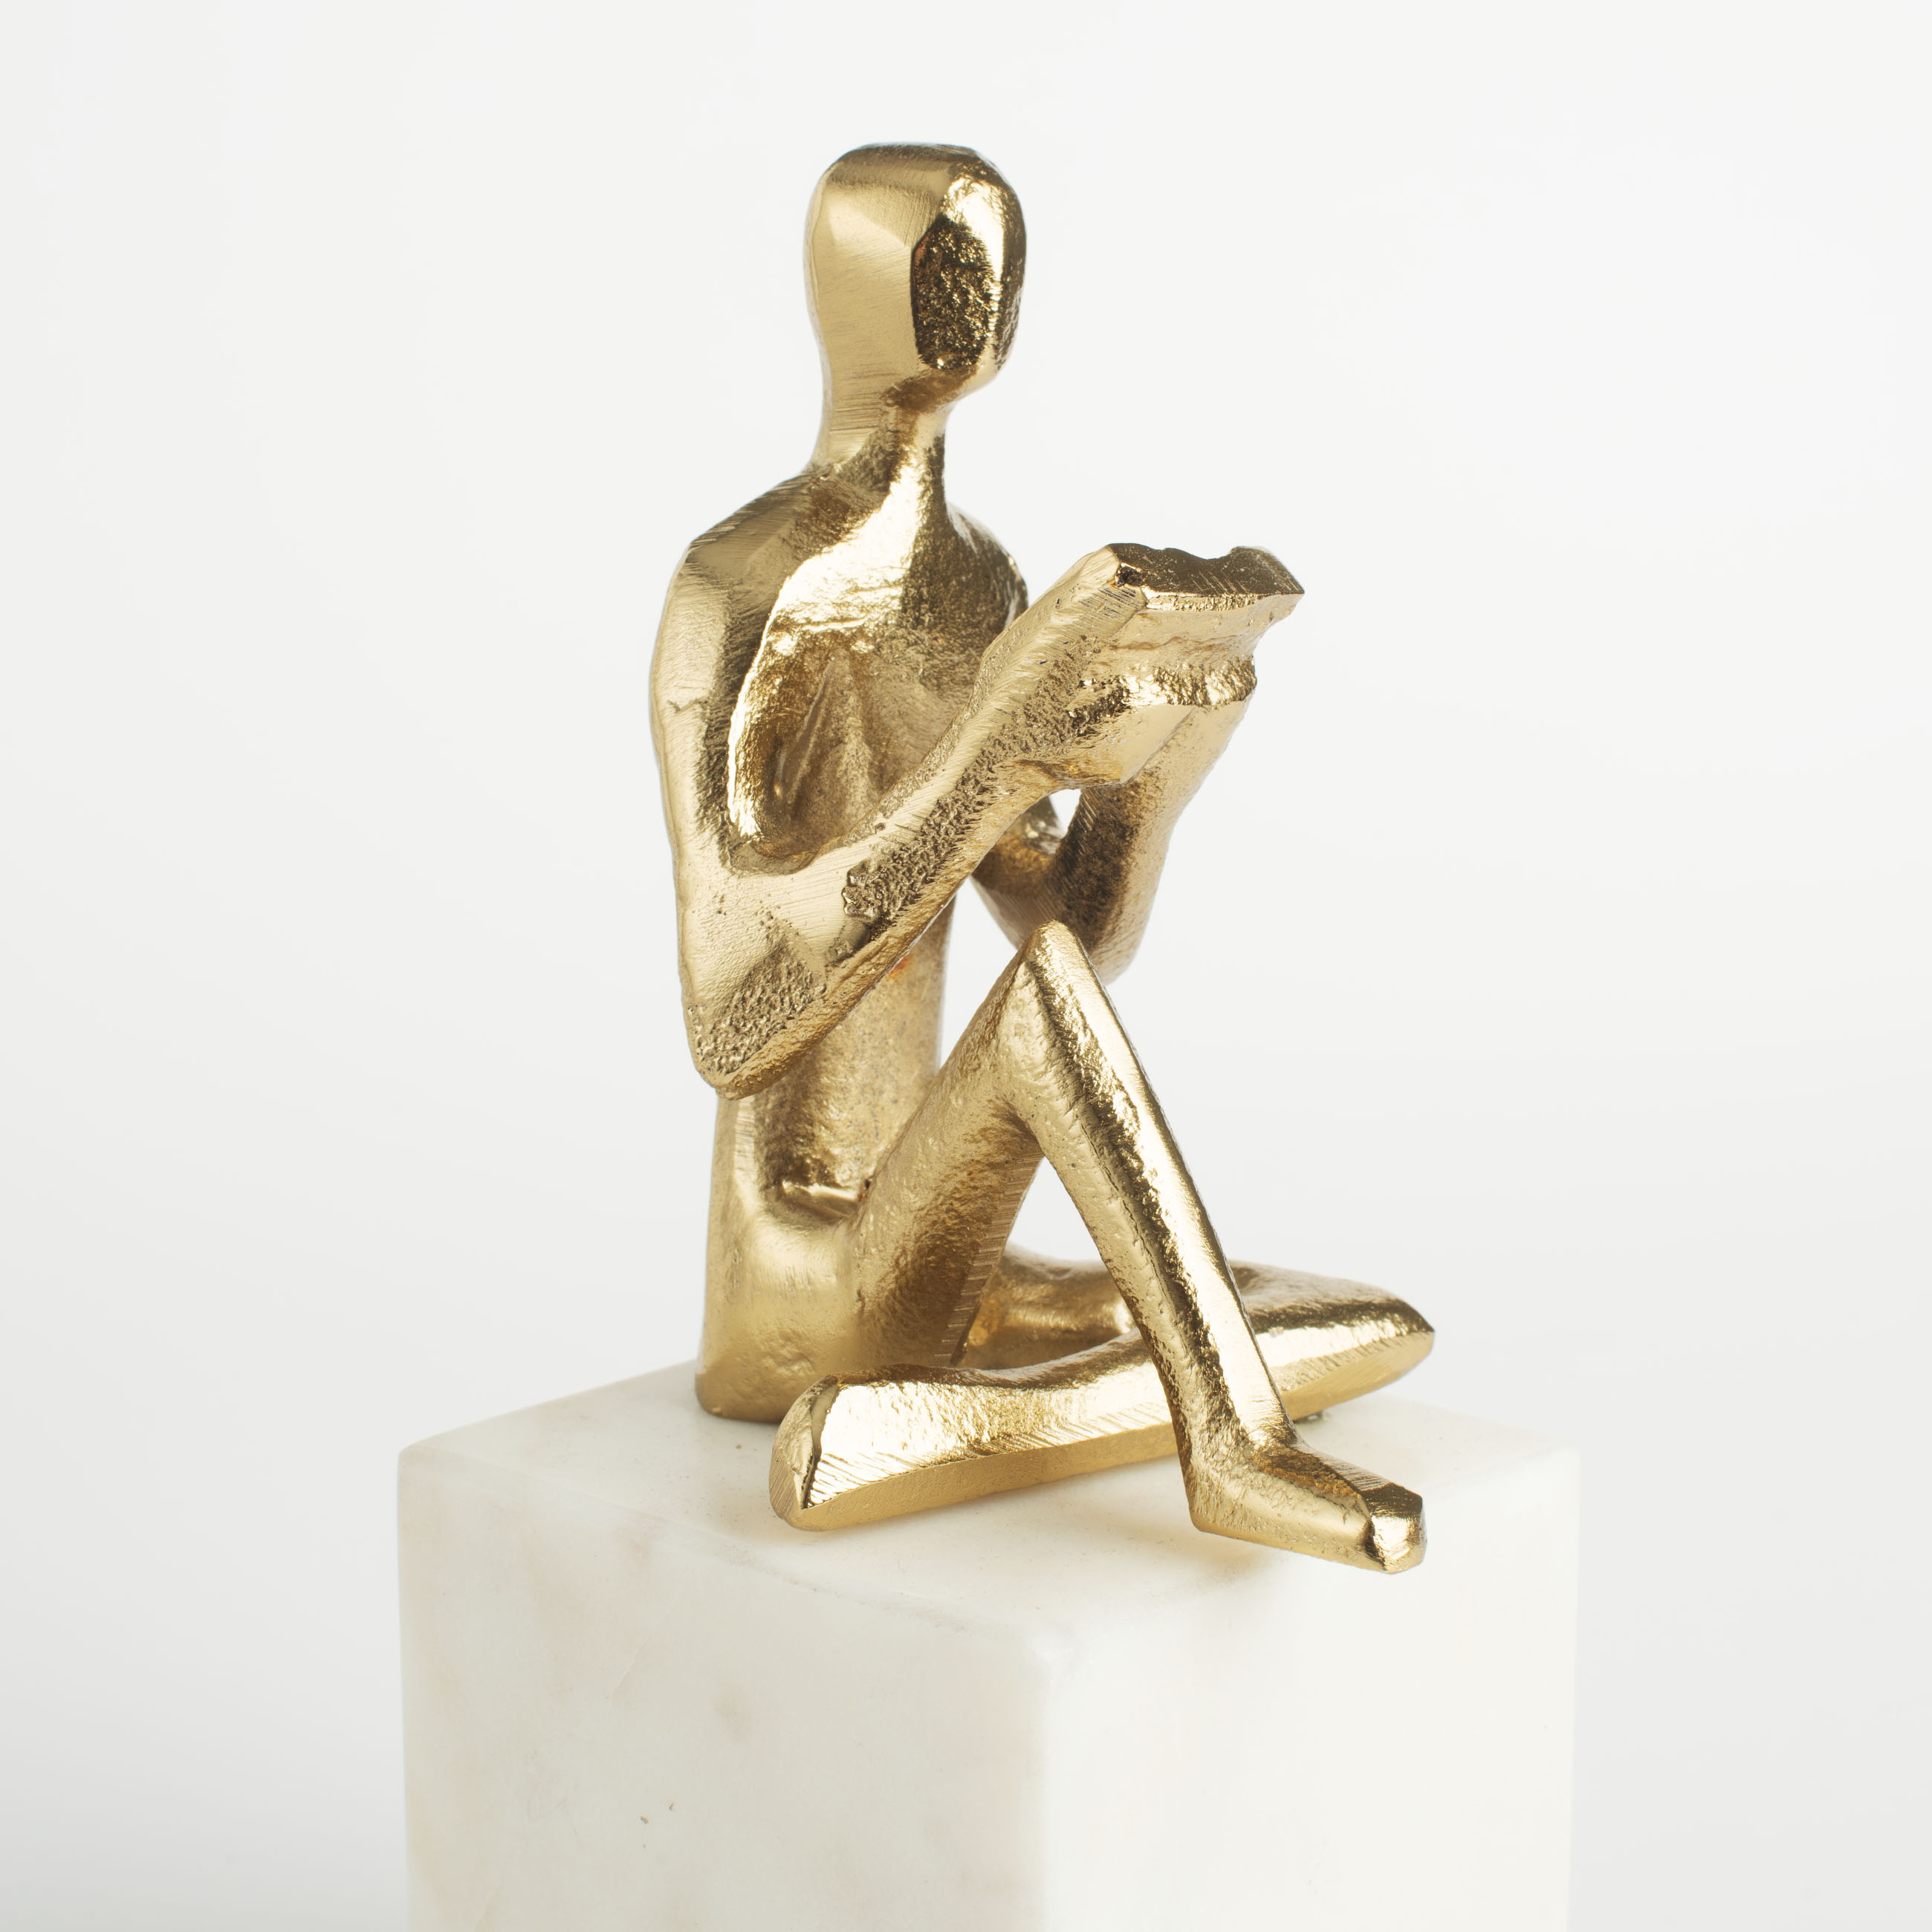 Statuette, 19 cm, metal / marble, golden, Man with a book, Think изображение № 5